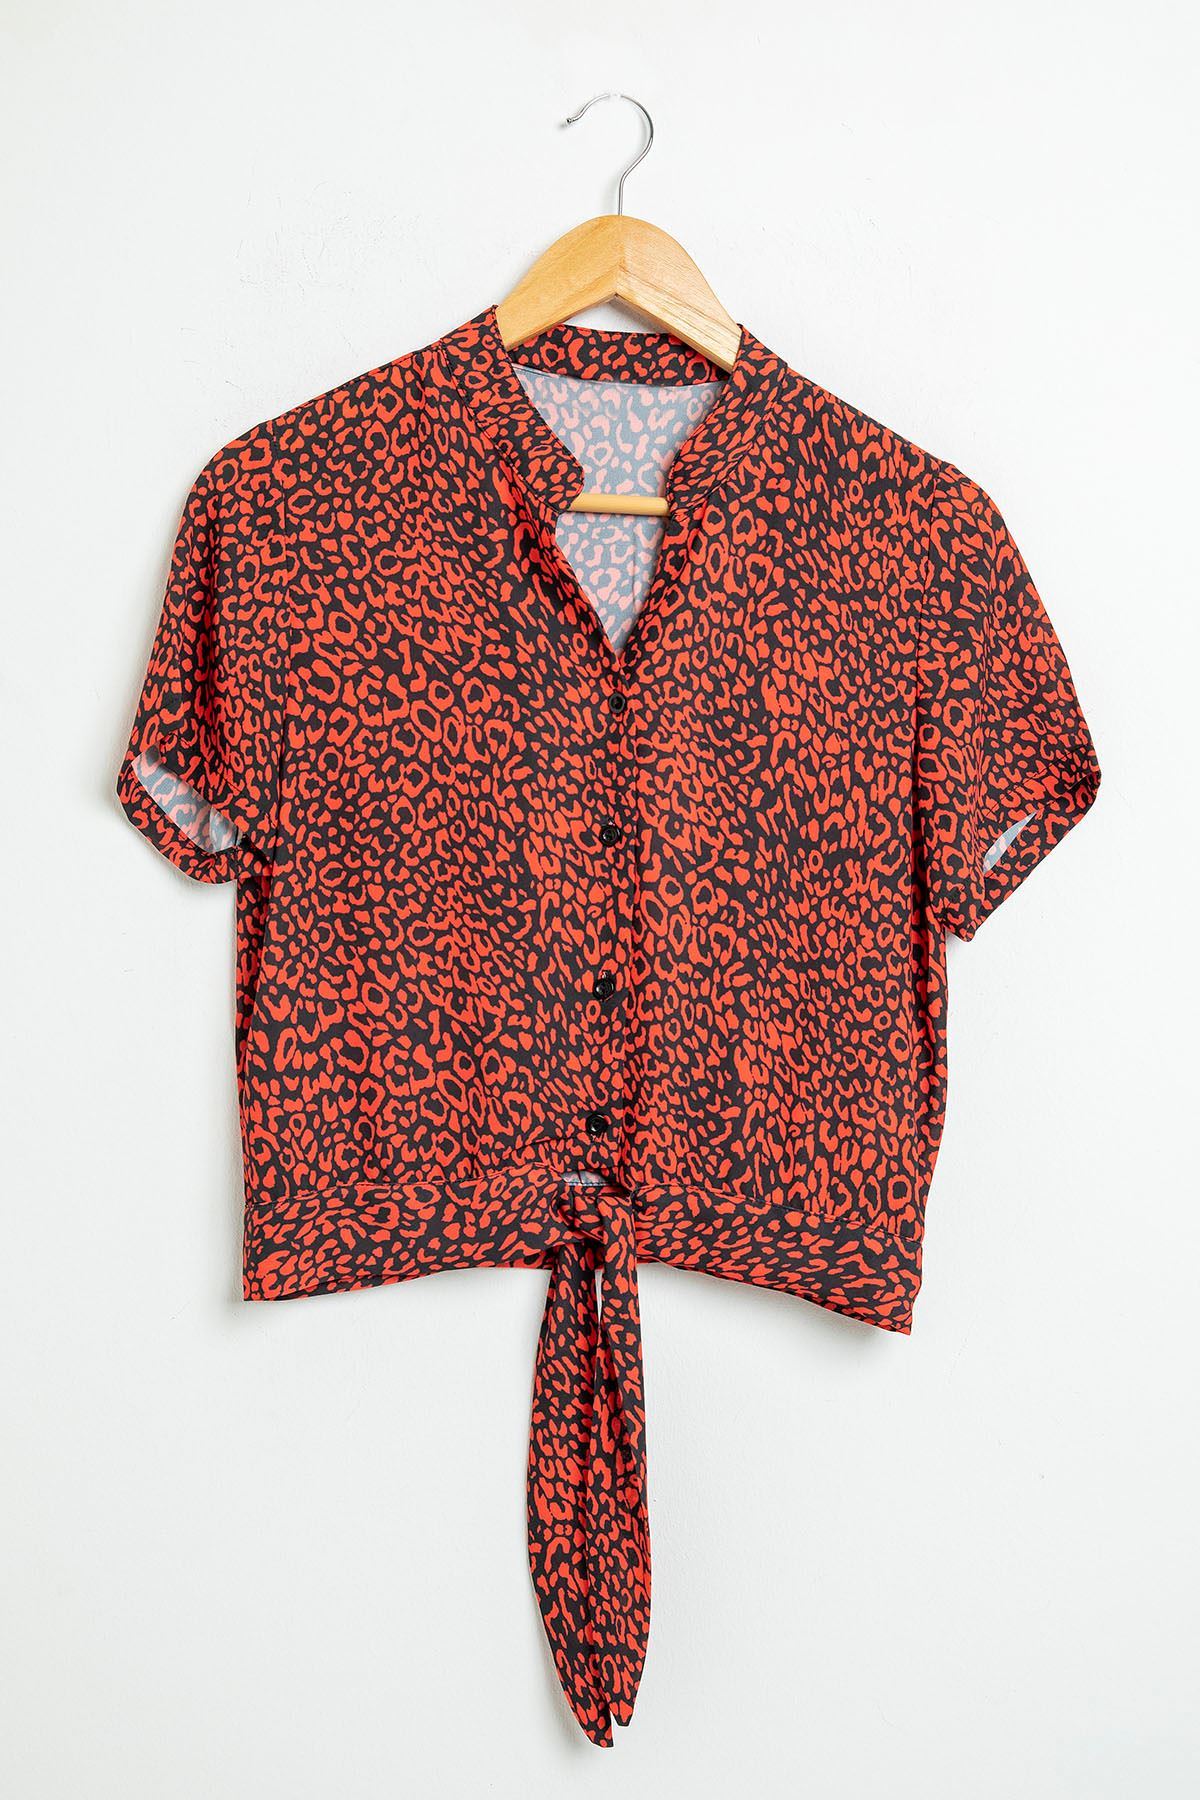 Jessica Blouse Short Sleeve Shirt Collar Leopard Print With Tie Front Blouse - Red